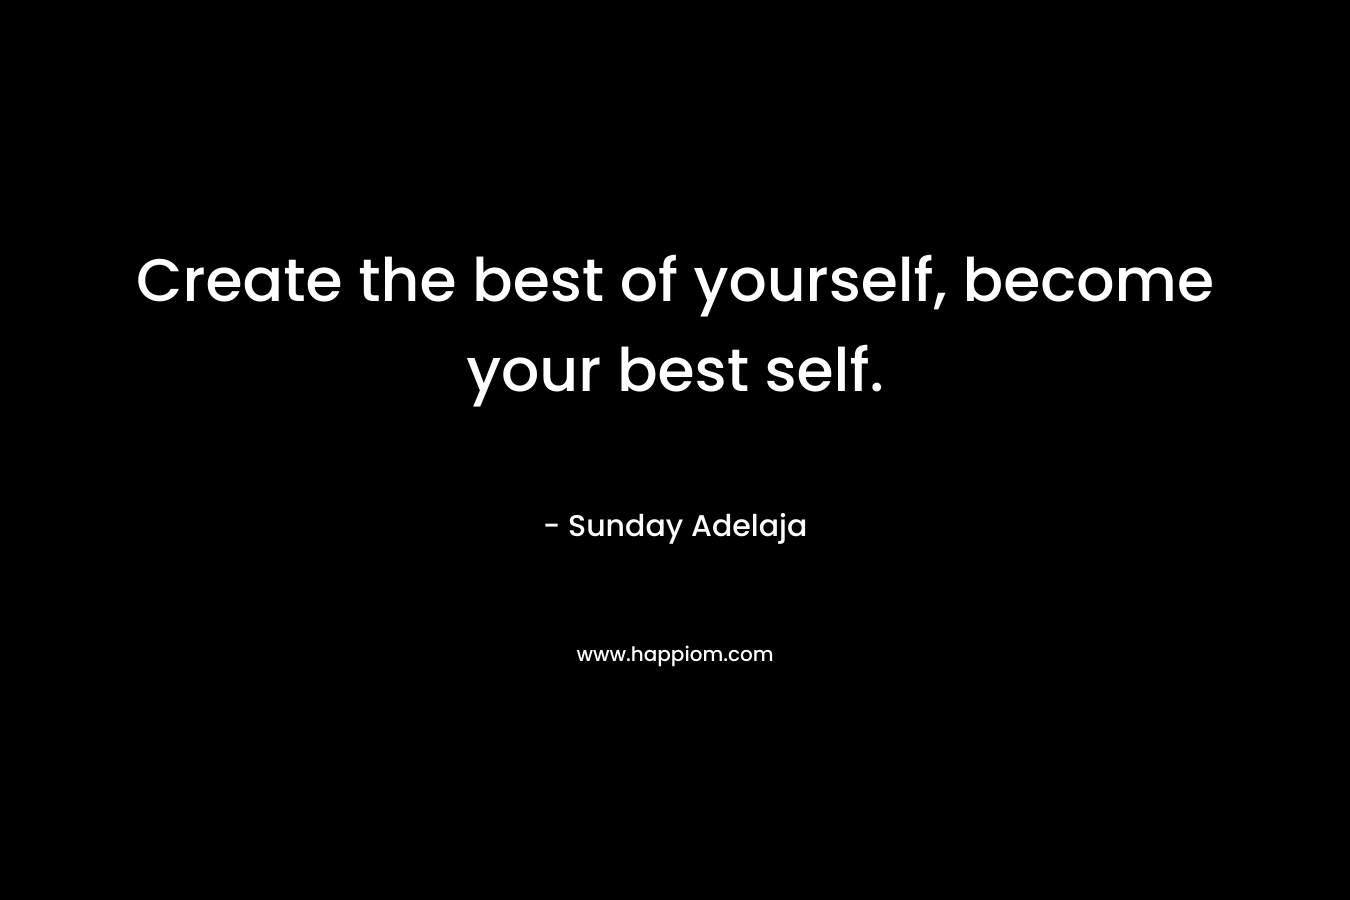 Create the best of yourself, become your best self.